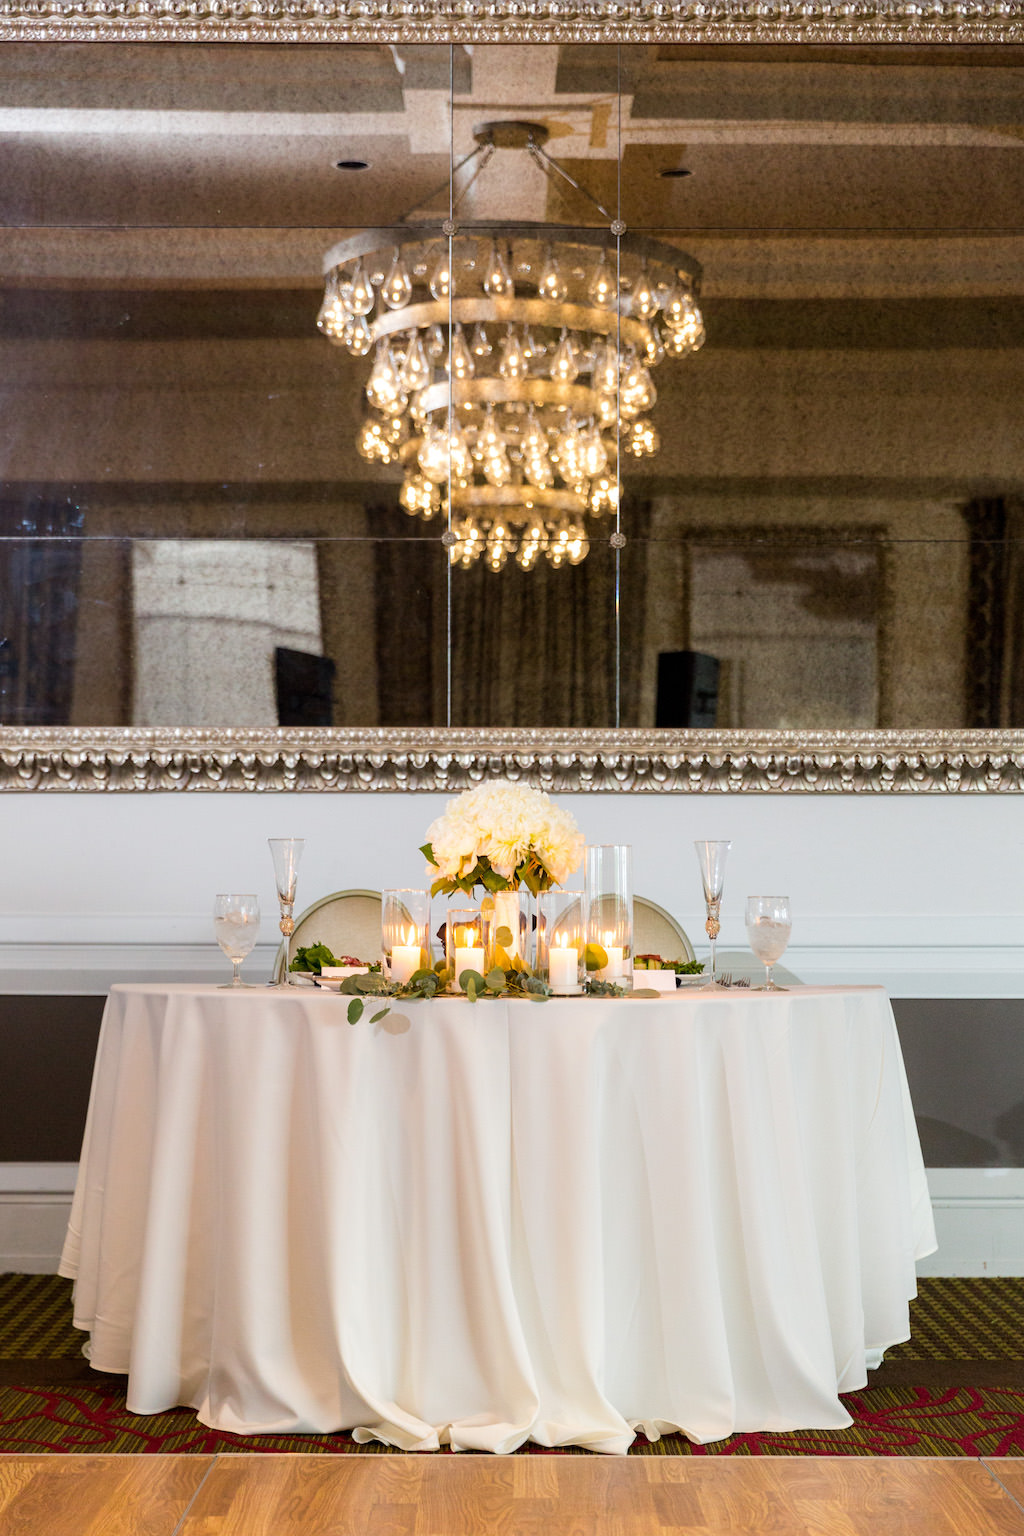 Vintage Hotel Ballroom Wedding Reception Sweetheart Table with White Peony with Greenery Centerpiece and Votive Candles | Tampa Bay Wedding Venue The Birchwood | Florist Cotton and Magnolia